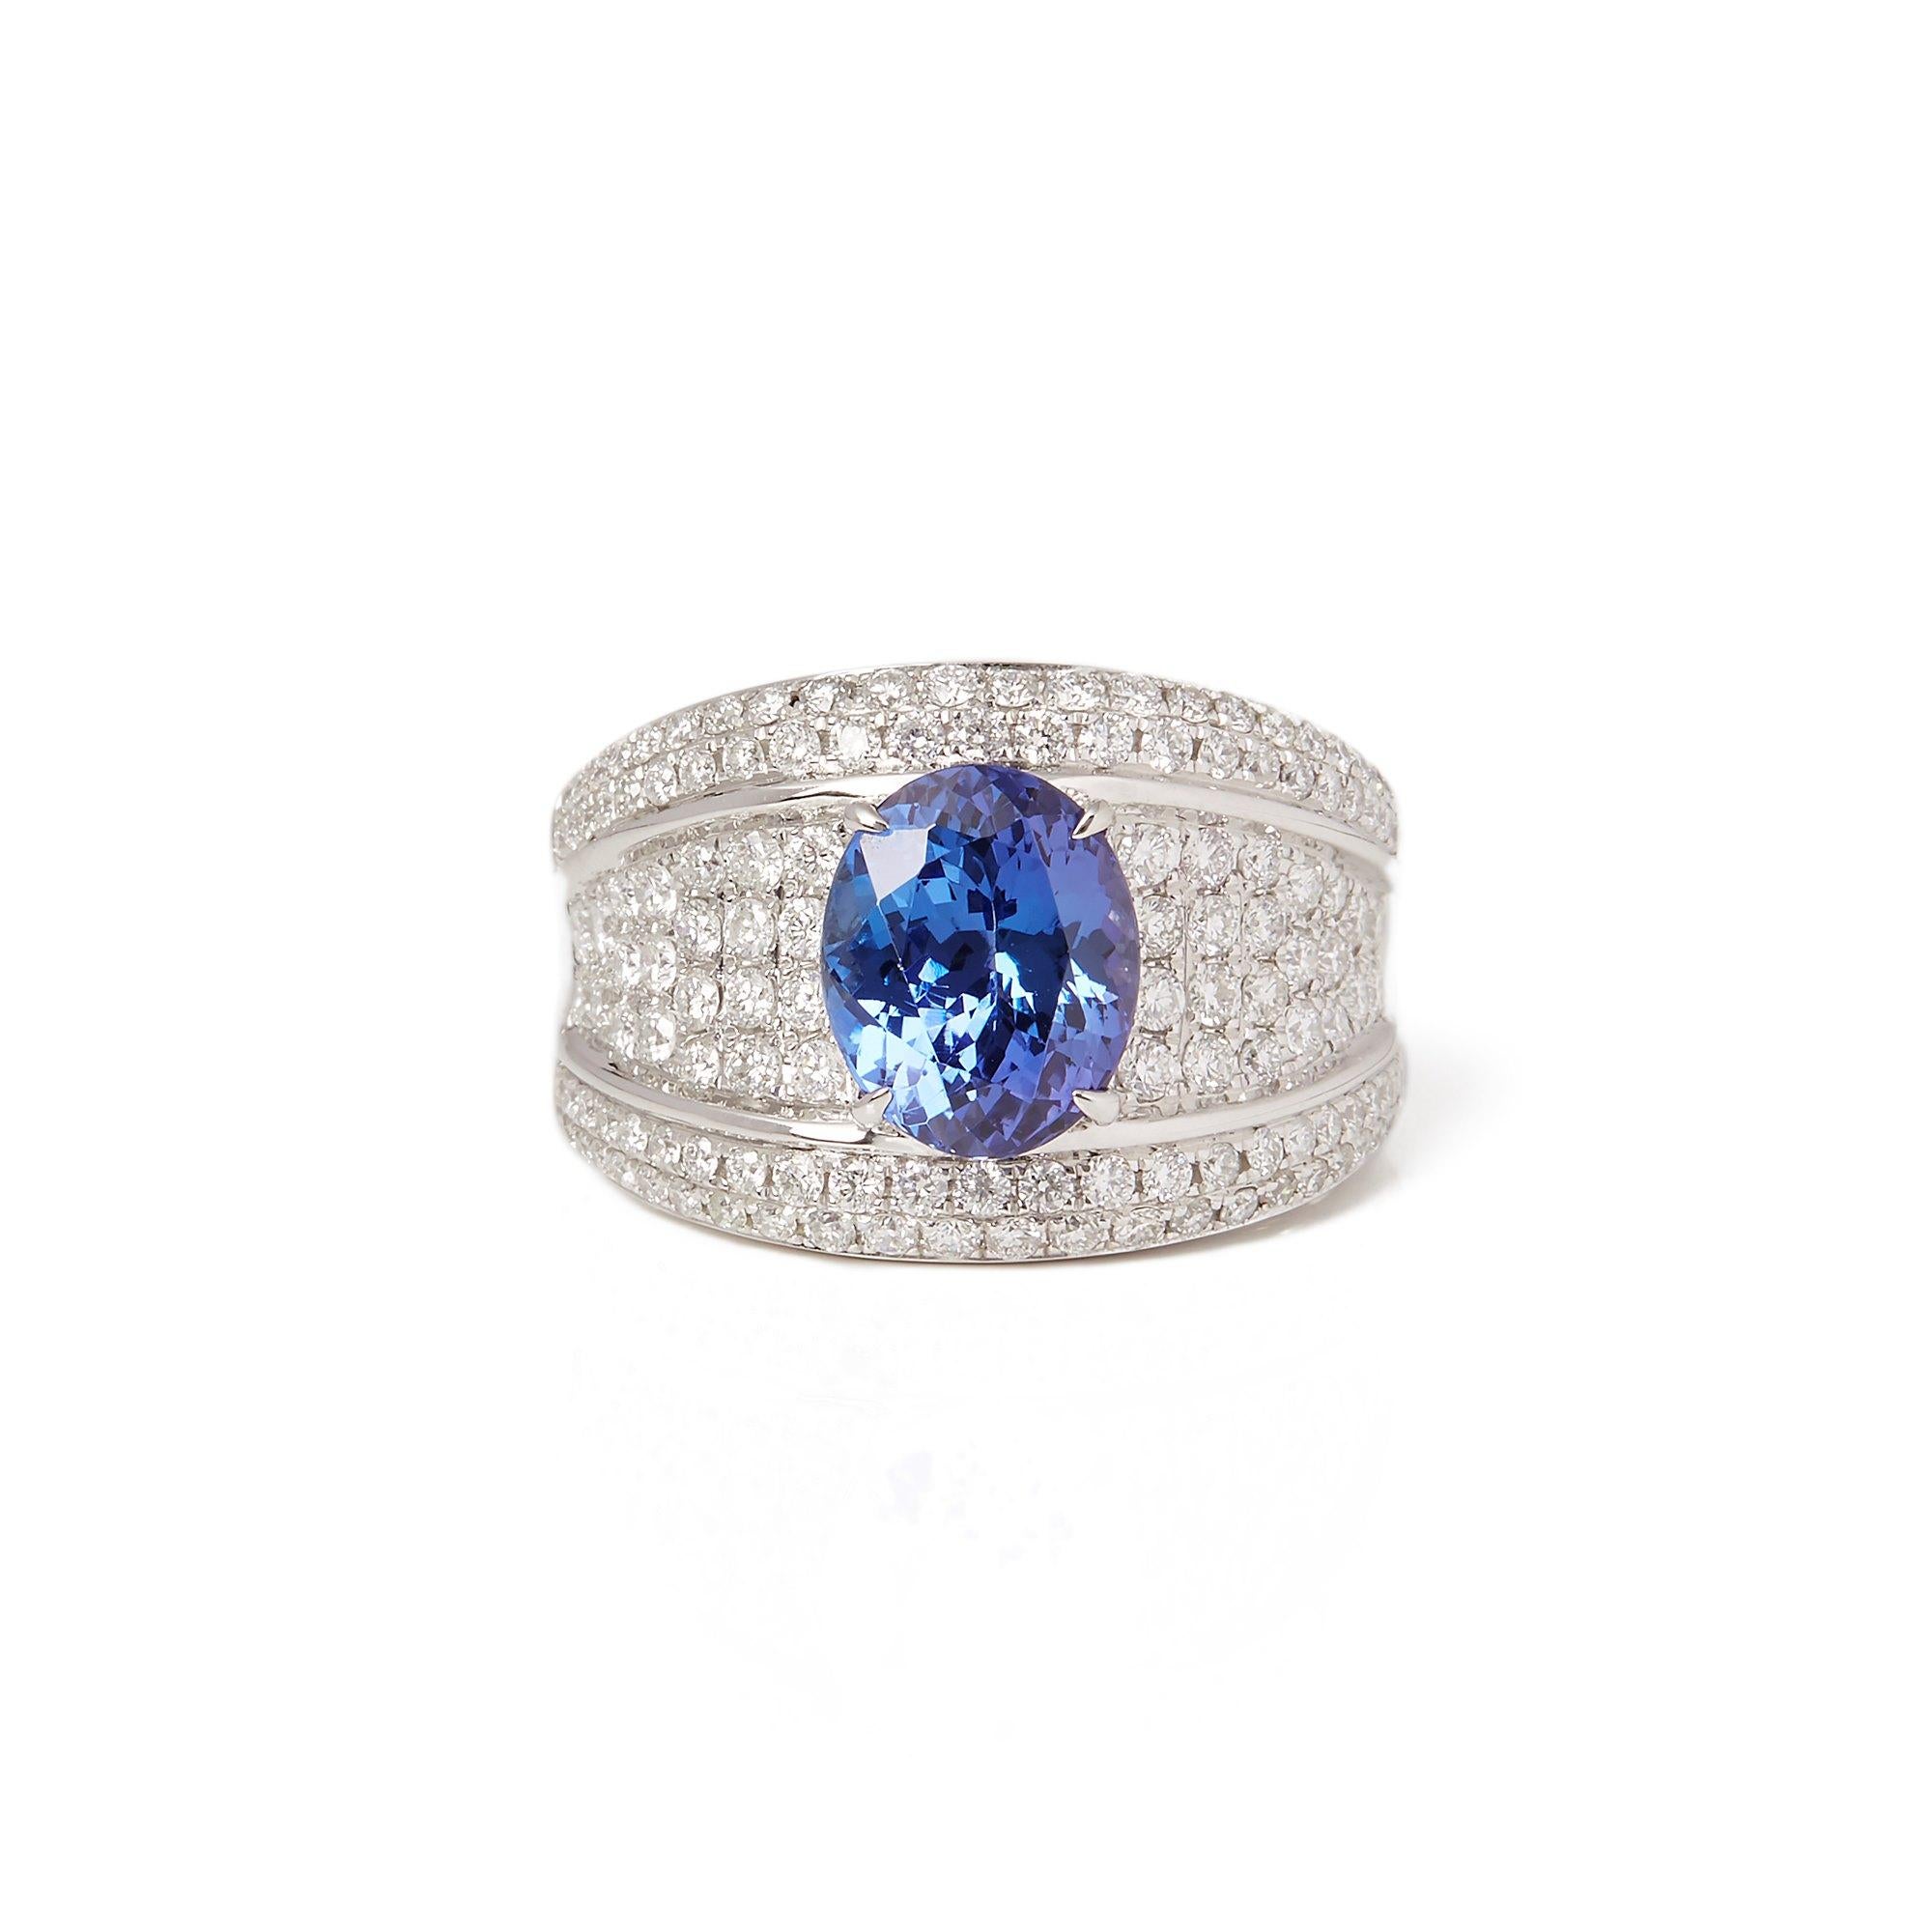 This ring designed by David Jerome is from his private collection and features one oval cut Tanzanite totalling 2.87cts sourced in the D block mine Tanzania. Set with round brilliant cut Diamonds totalling 1.31cts mounted in an 18k white gold